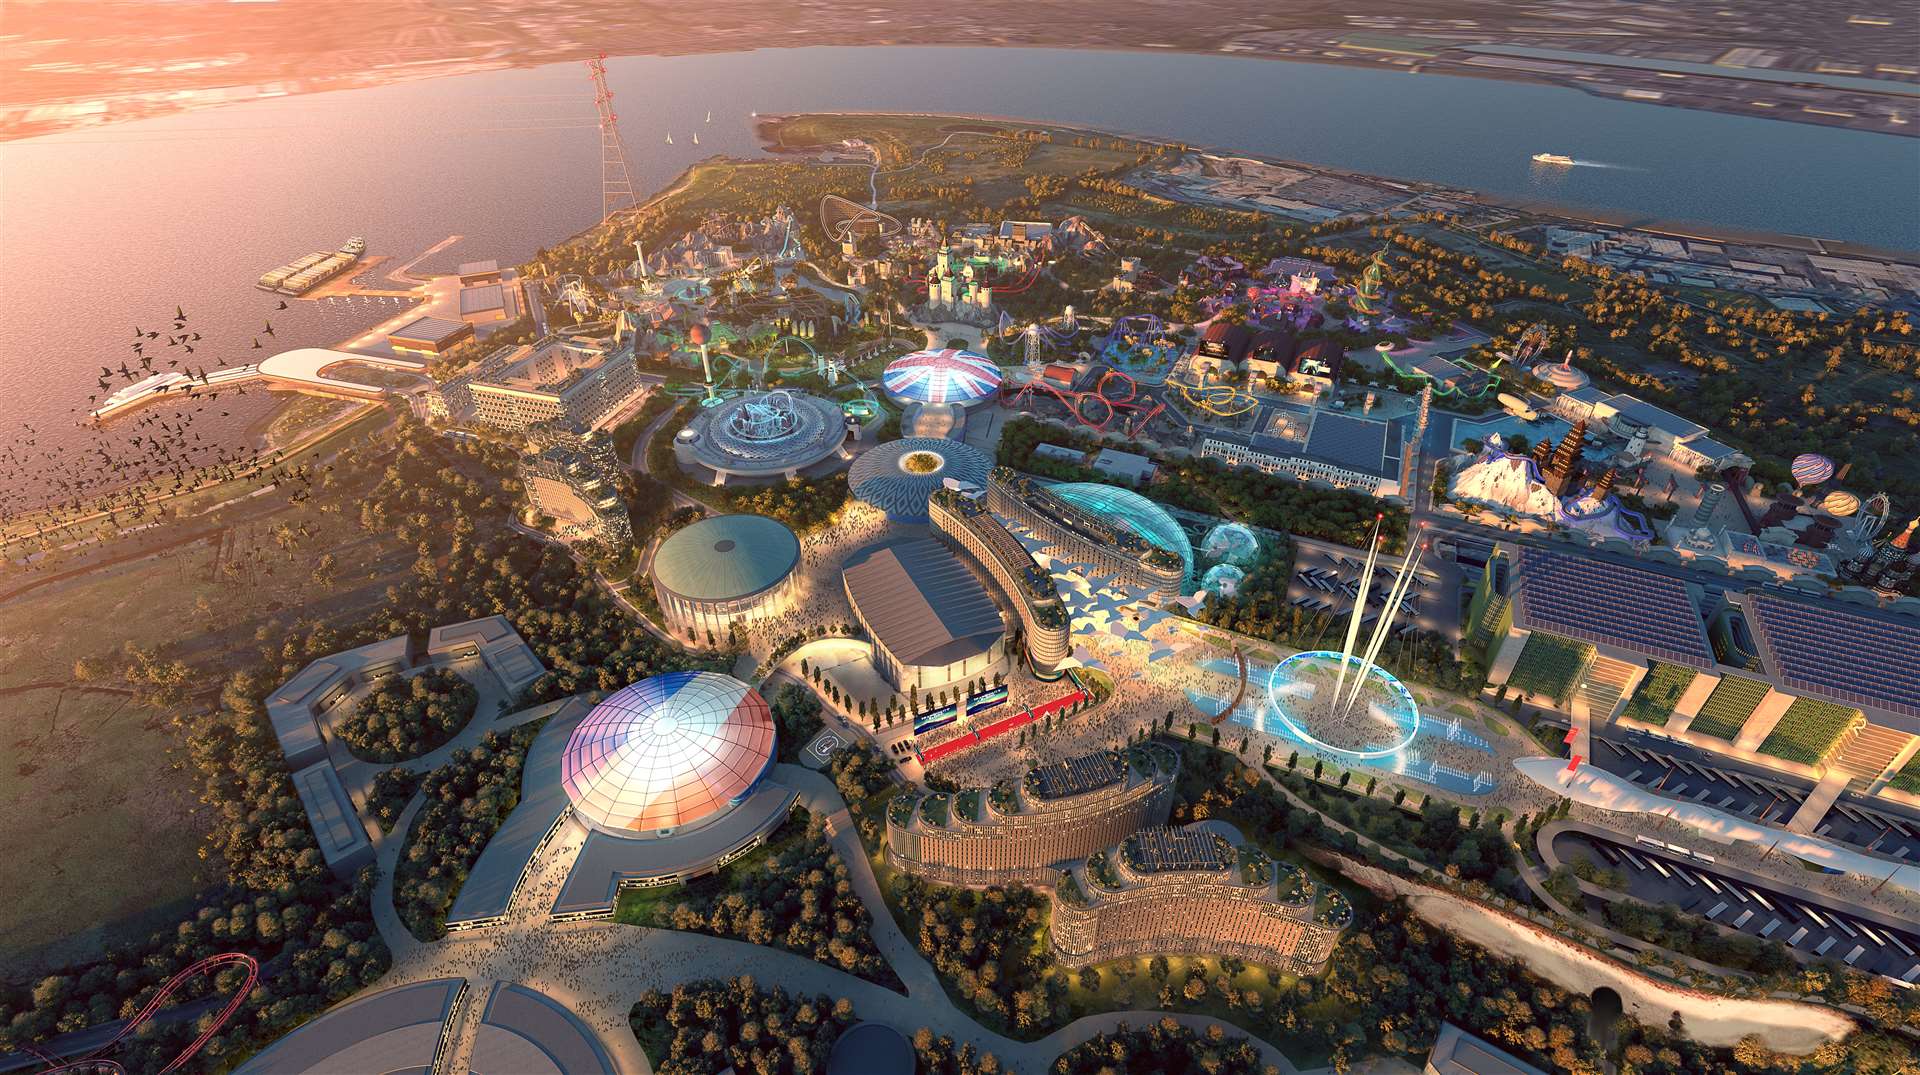 A new detailed impression of what the London Resort theme park will look like as part of the £2.5bn development